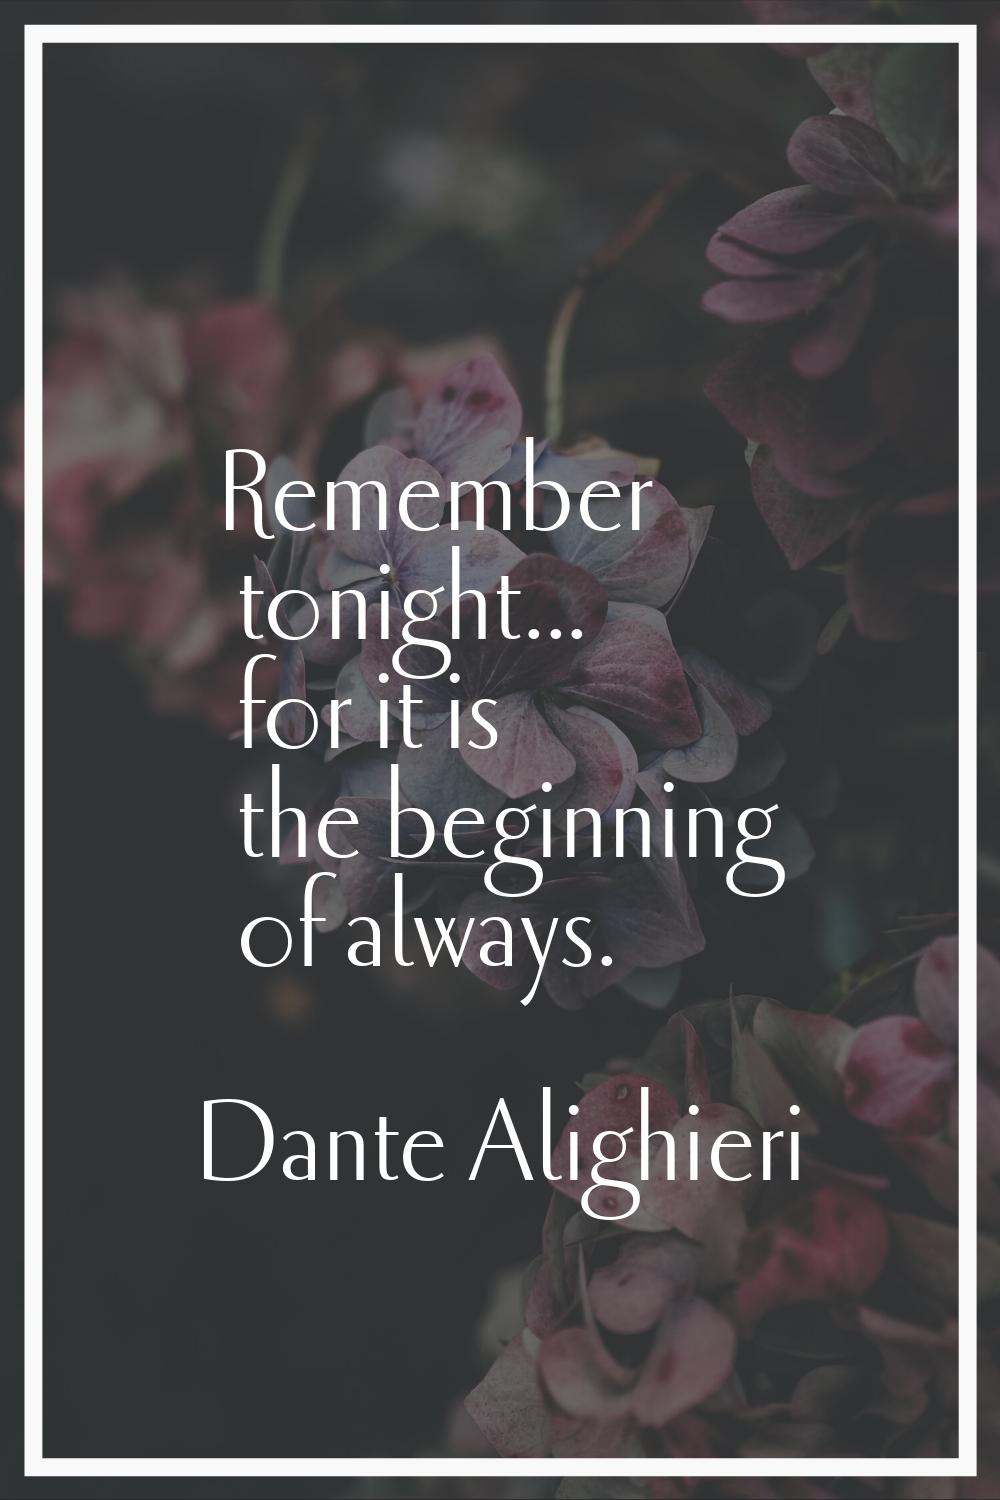 Remember tonight... for it is the beginning of always.